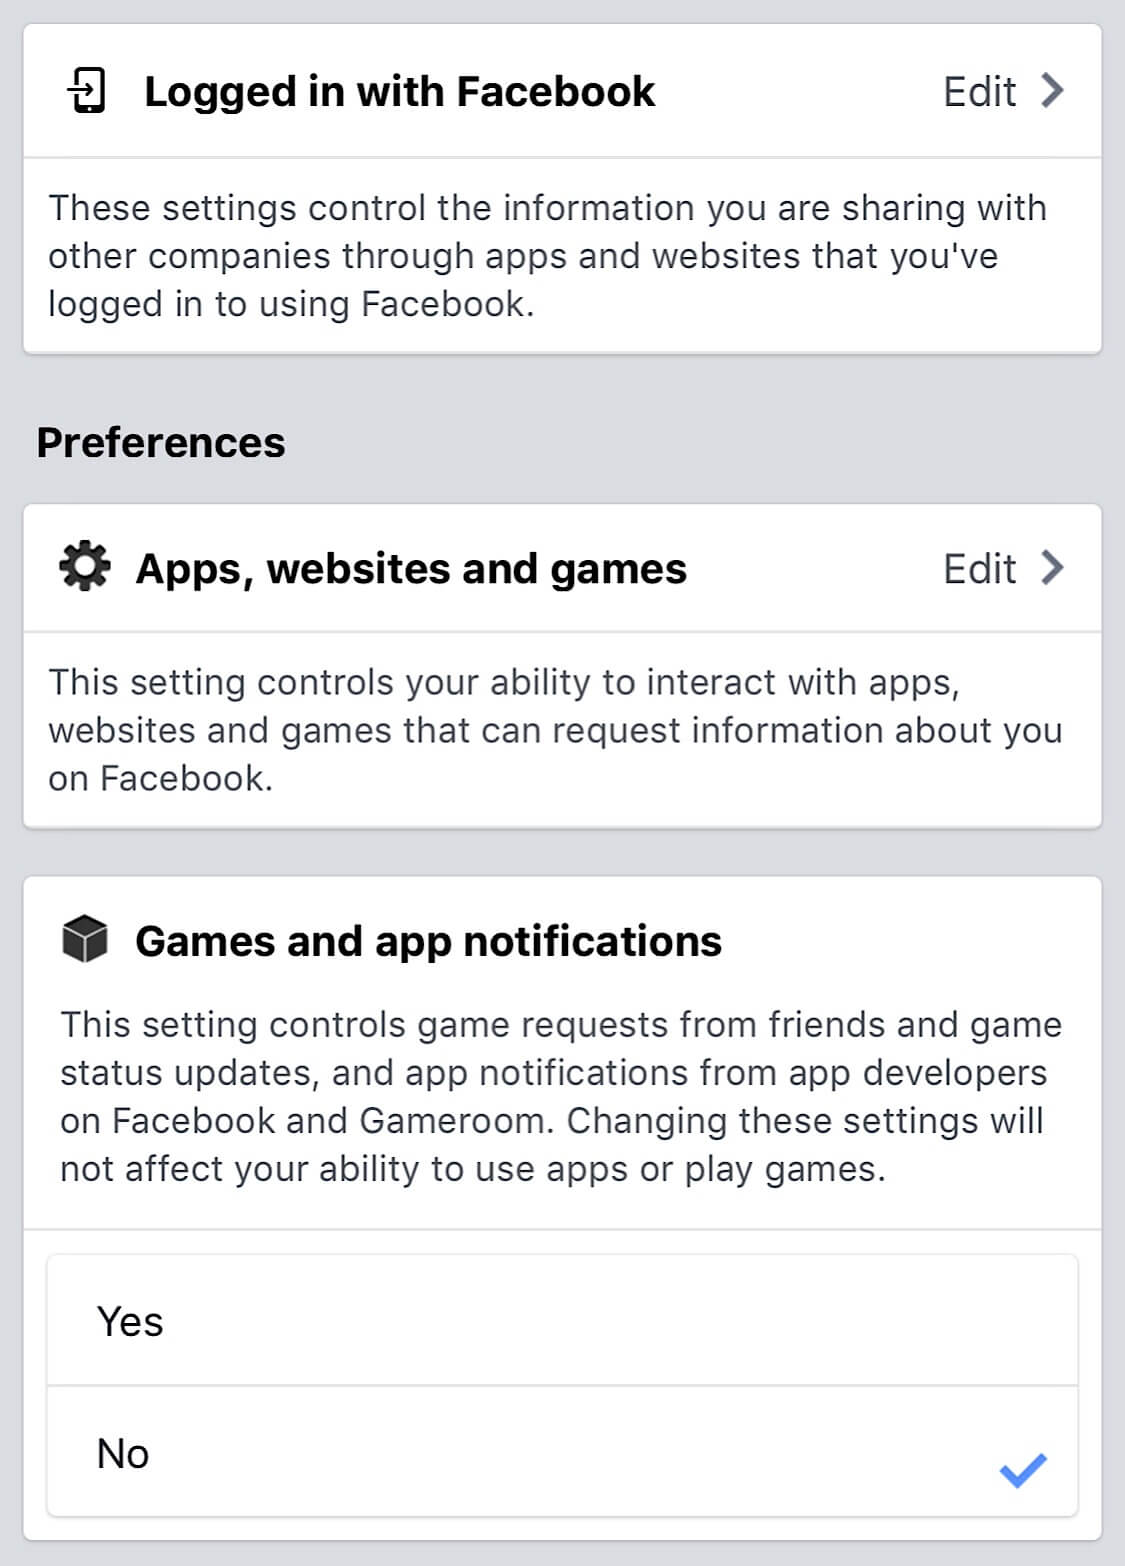 Screenshots showing the specific app and website settings you should change to restrict the amount of data Facebook collects.